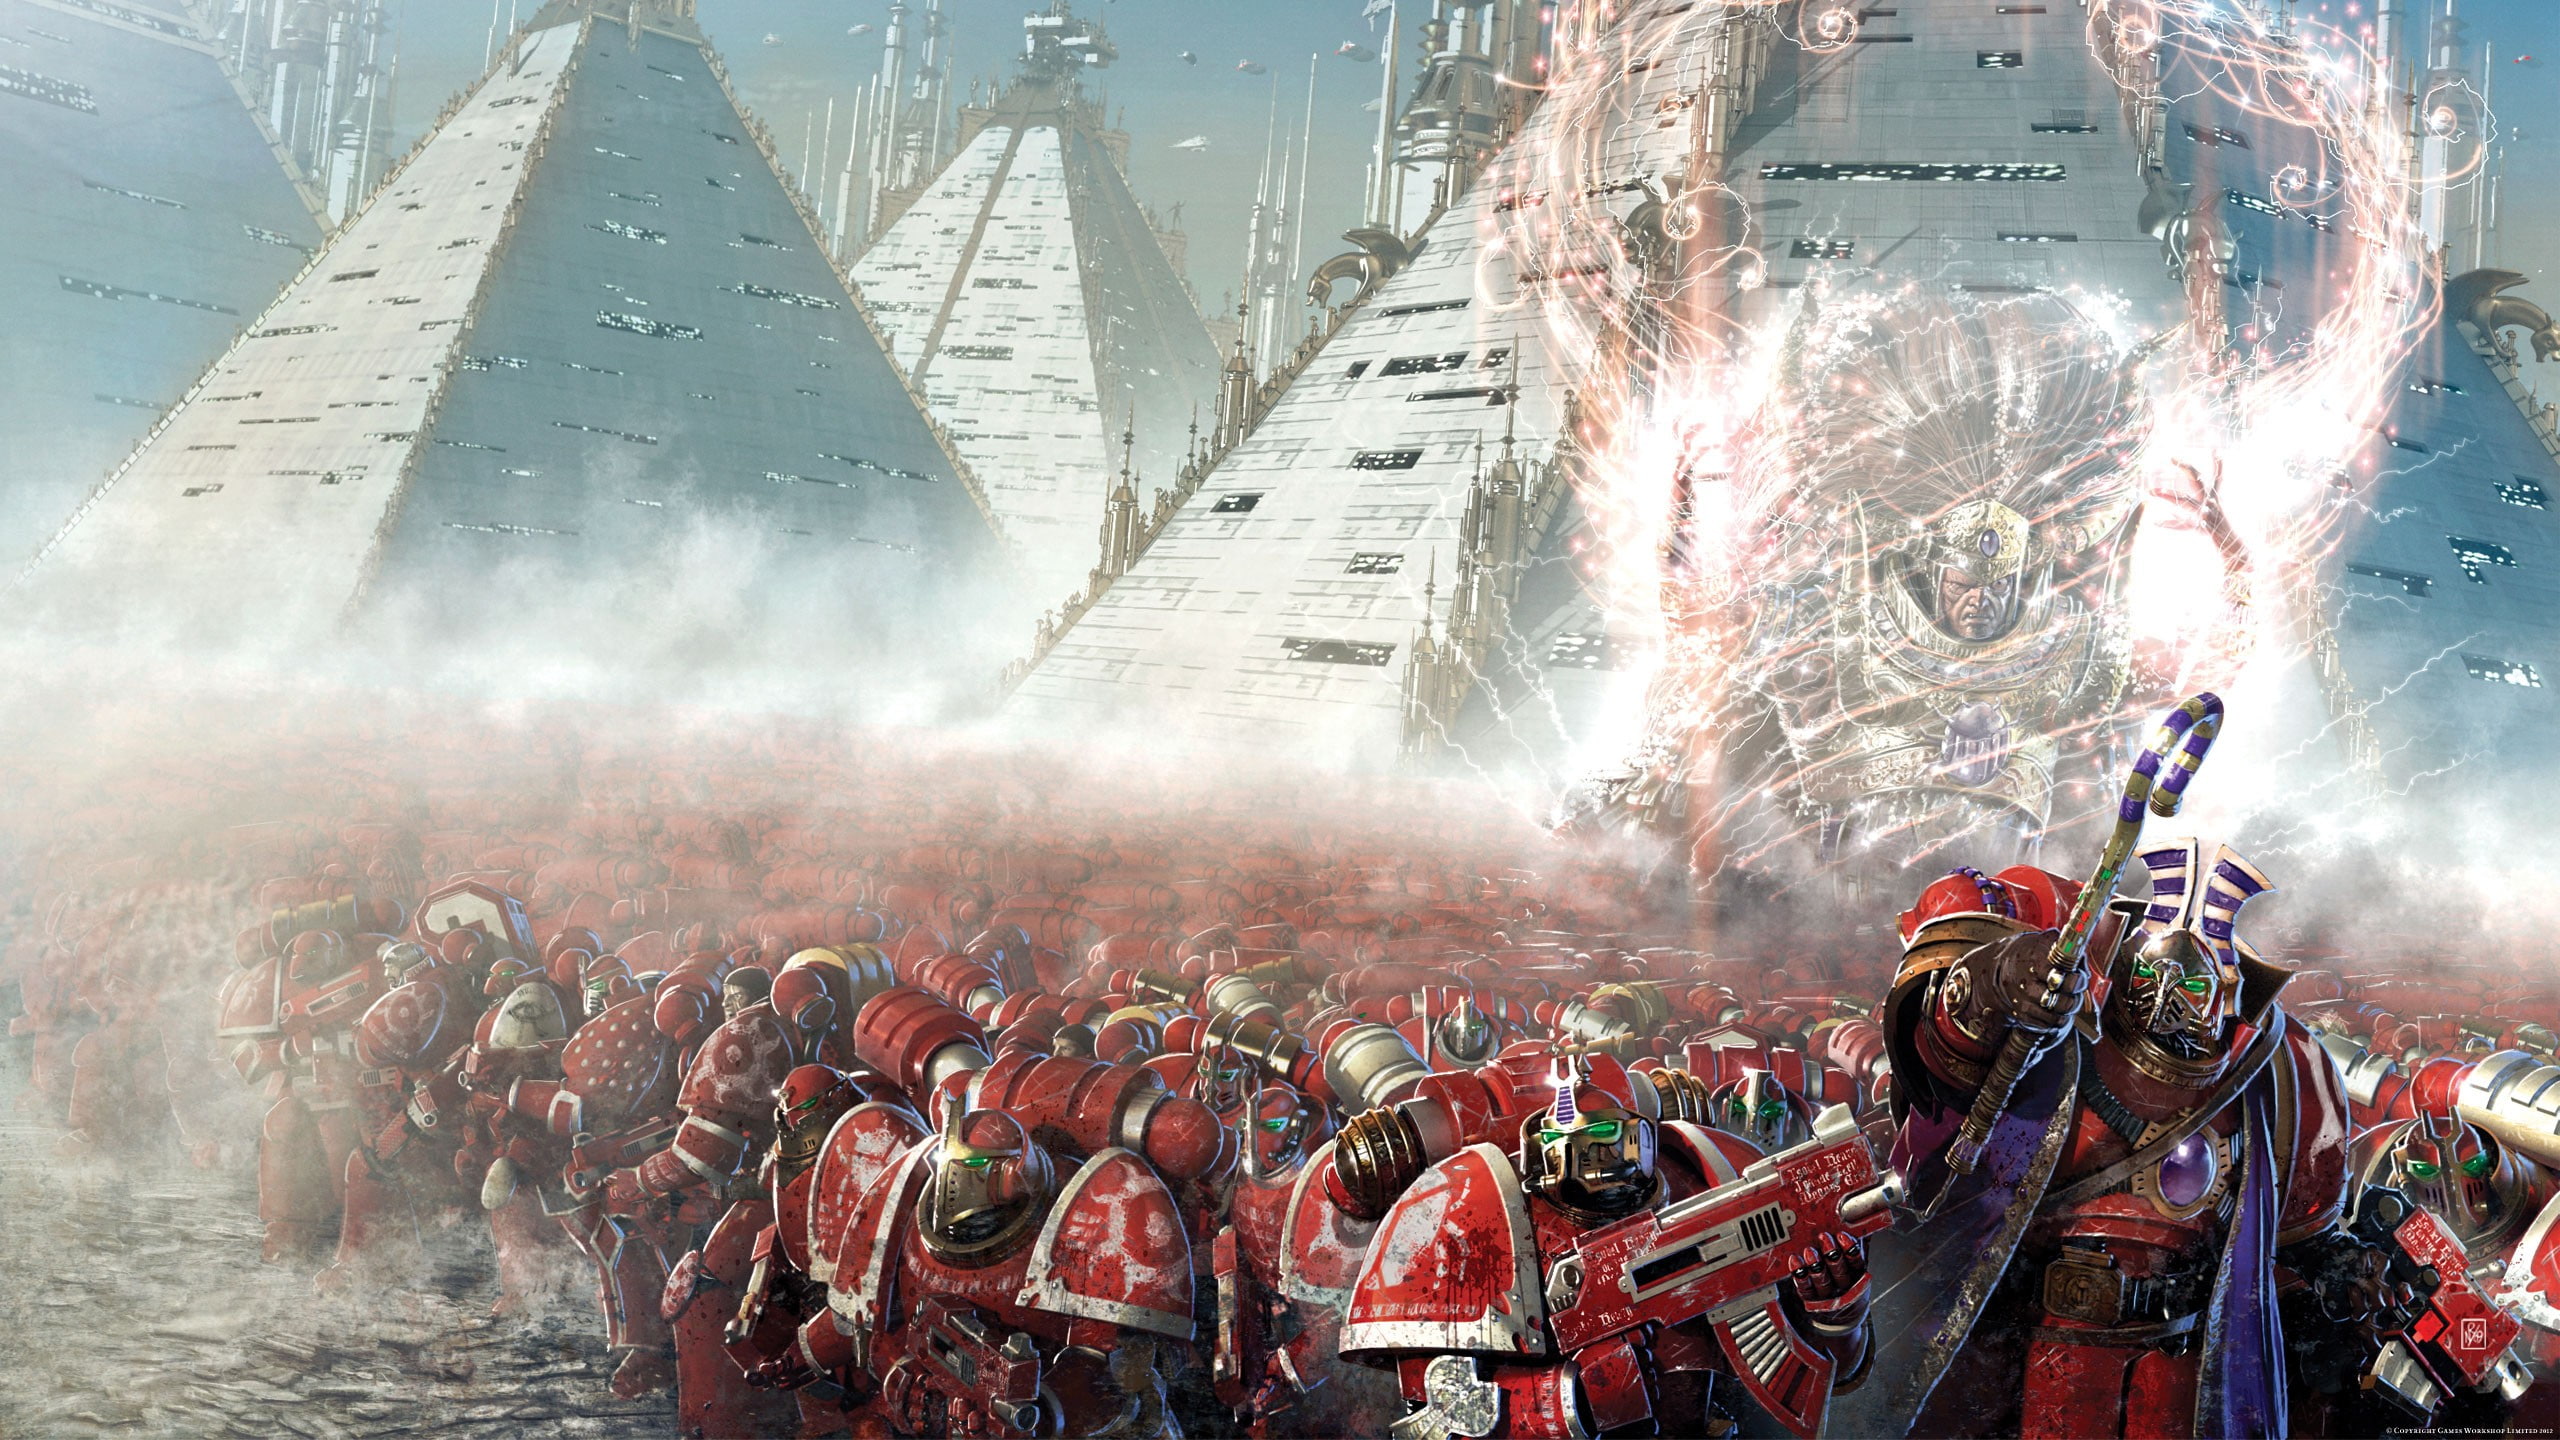 40k, fiction, marines, science, sons, space, thousand, warhammer